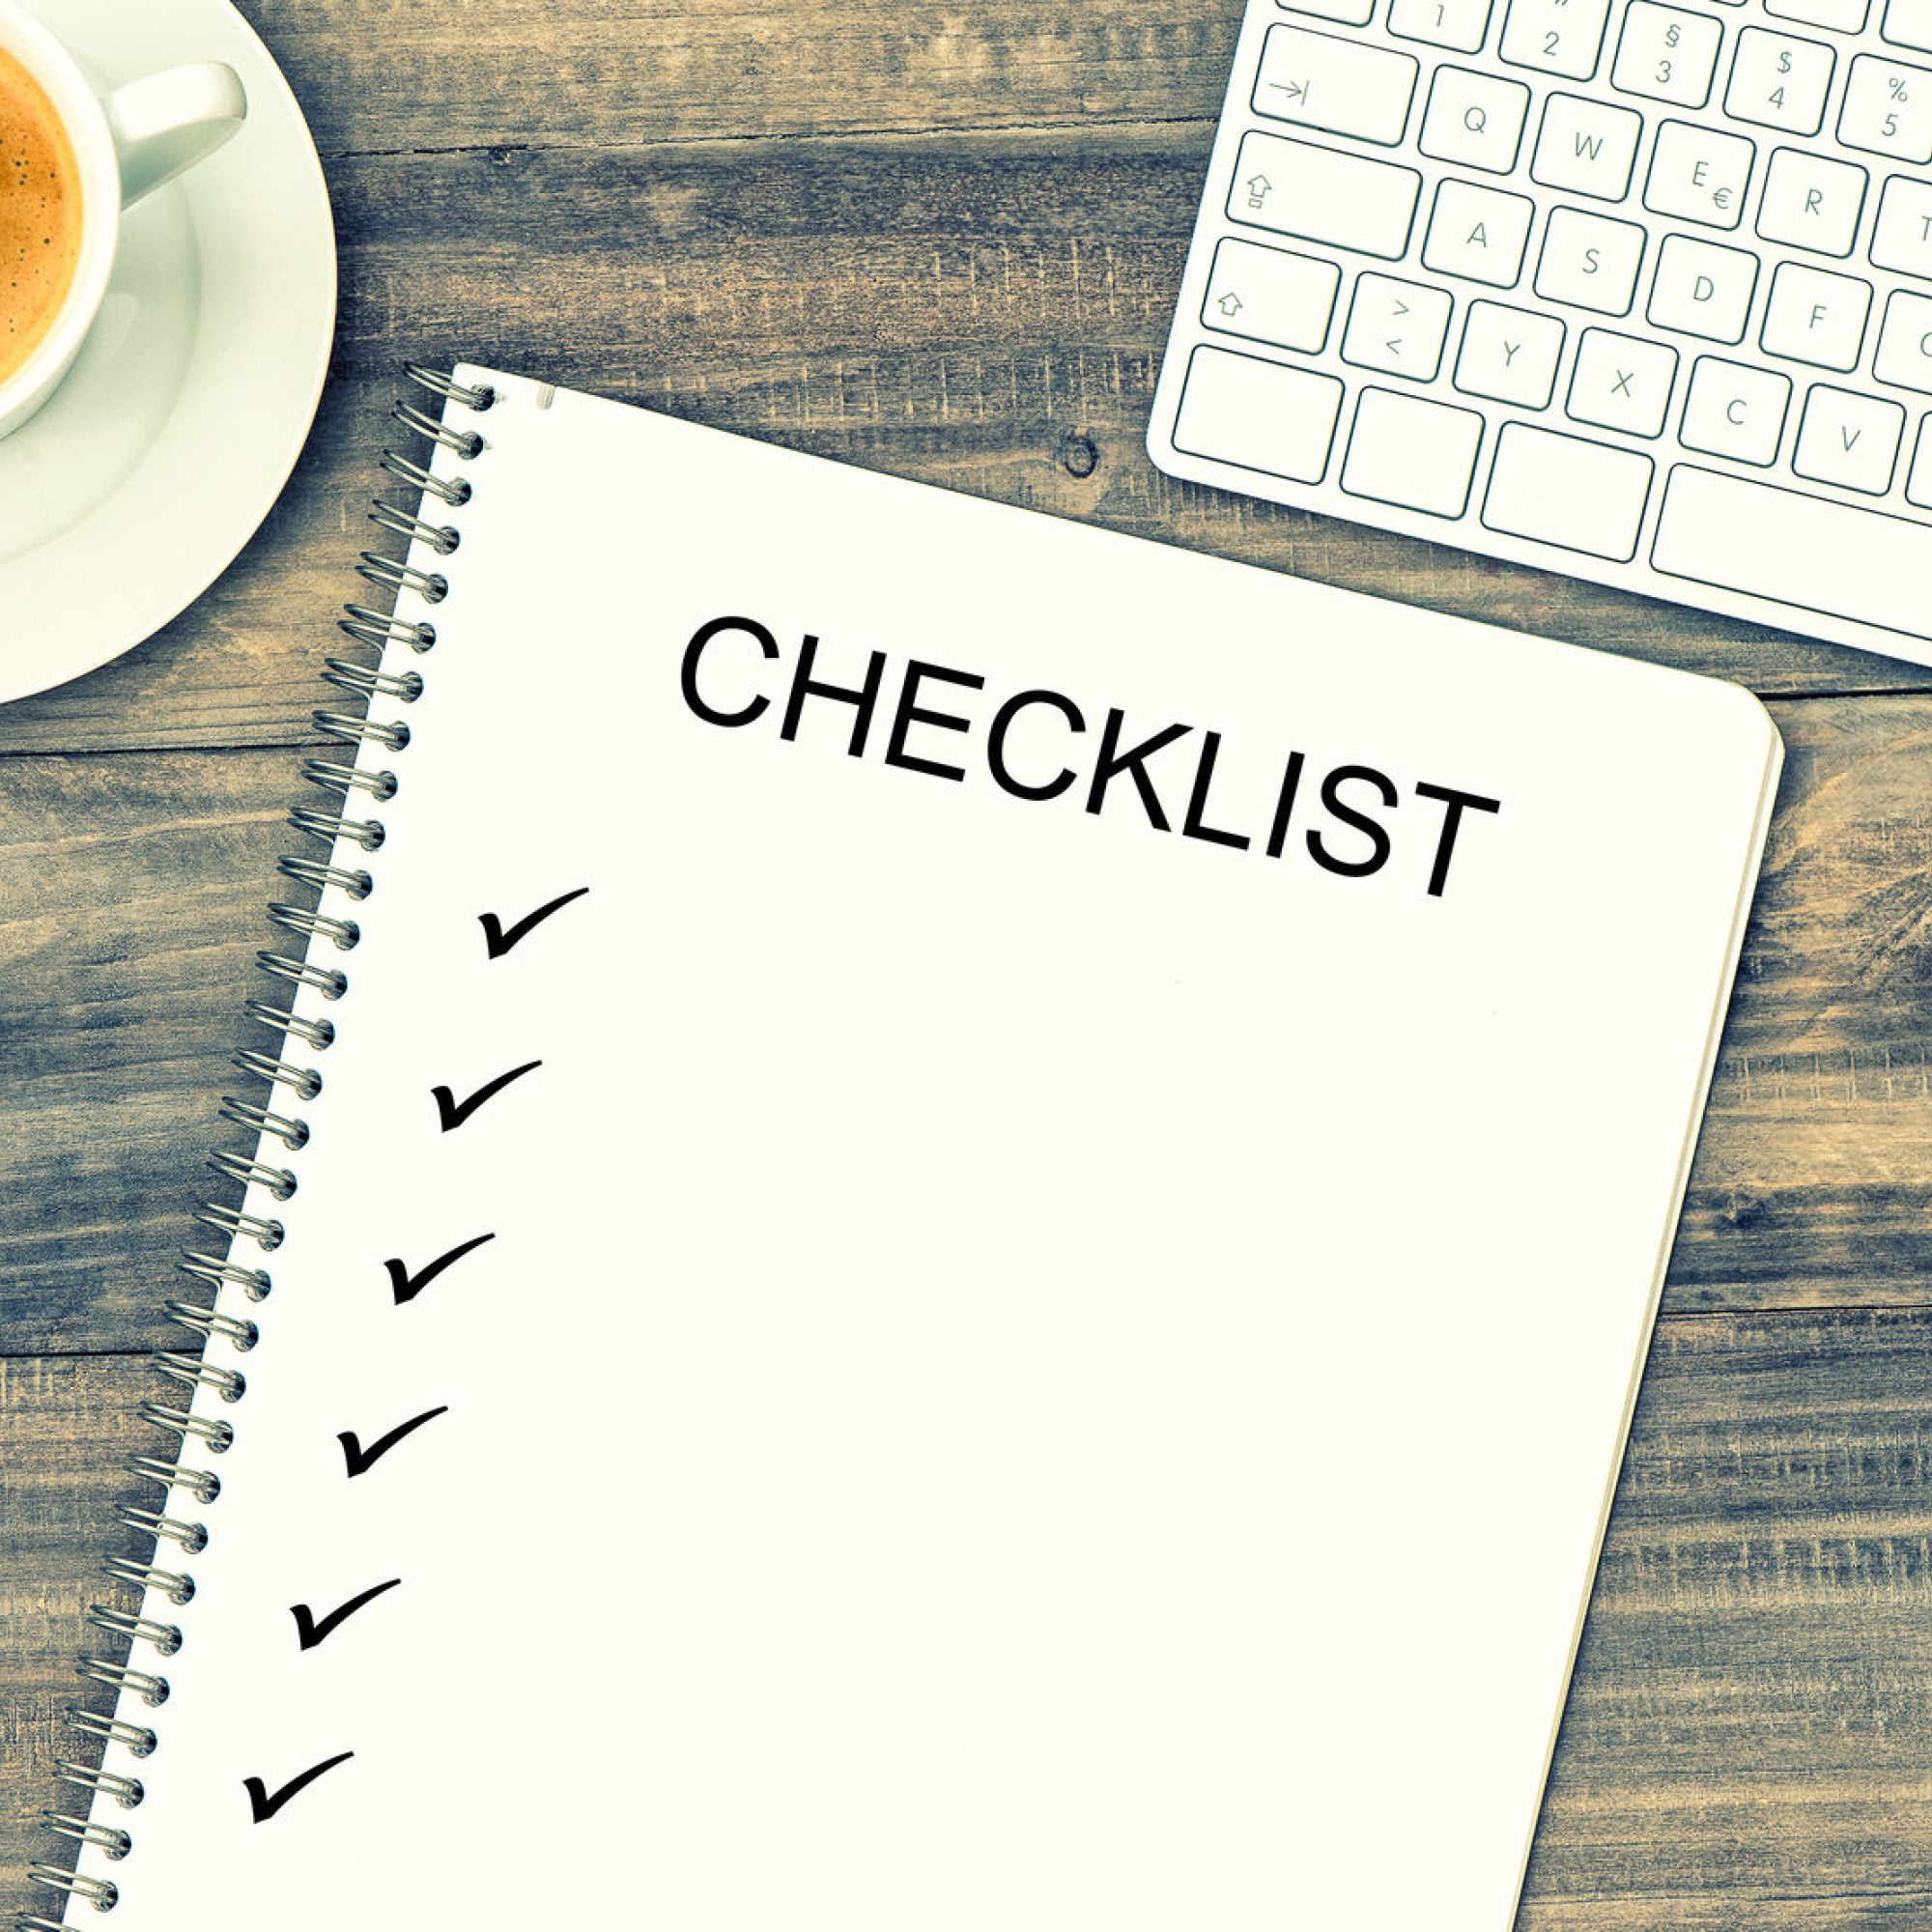 Need a consistent way to promote your blog posts? Use this essential blog promotion checklist to make sure your posts get the attention they deserve! #eliteblogacademy #socialmedia #growyourblog